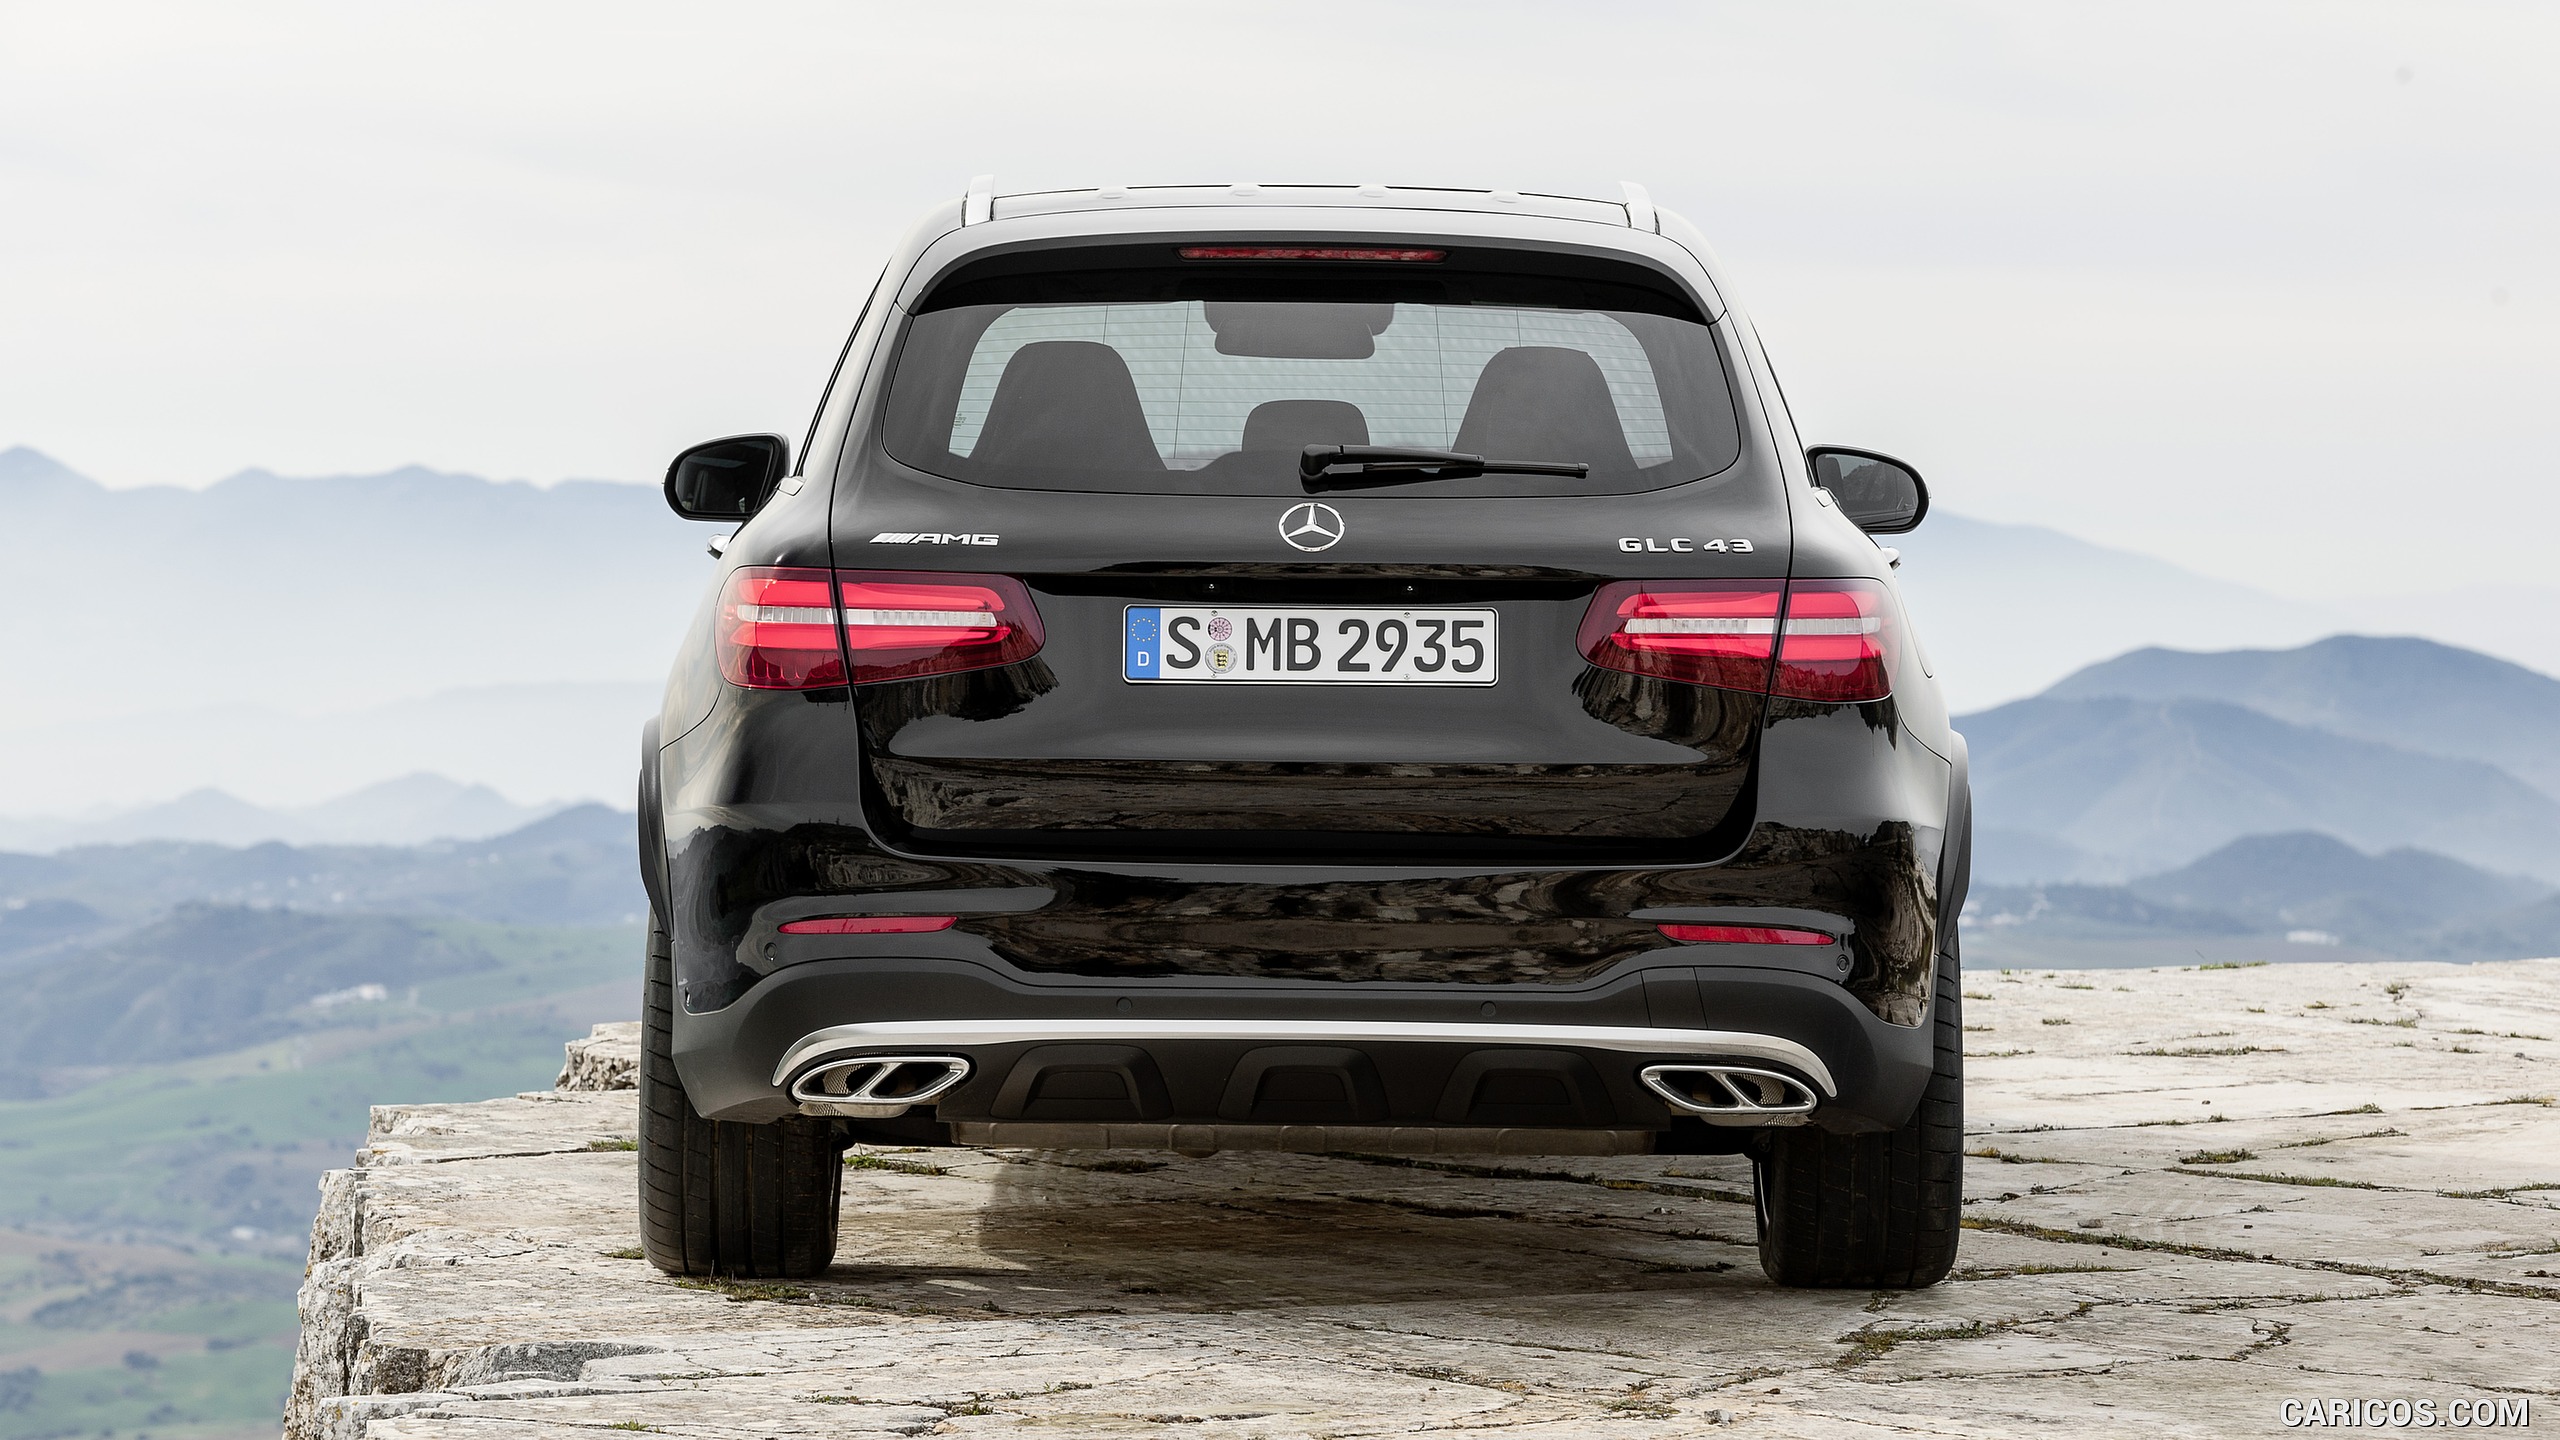 2017 Mercedes-AMG GLC 43 4MATIC (Chassis: X253, Color: Obsidian Black) - Rear, #5 of 108